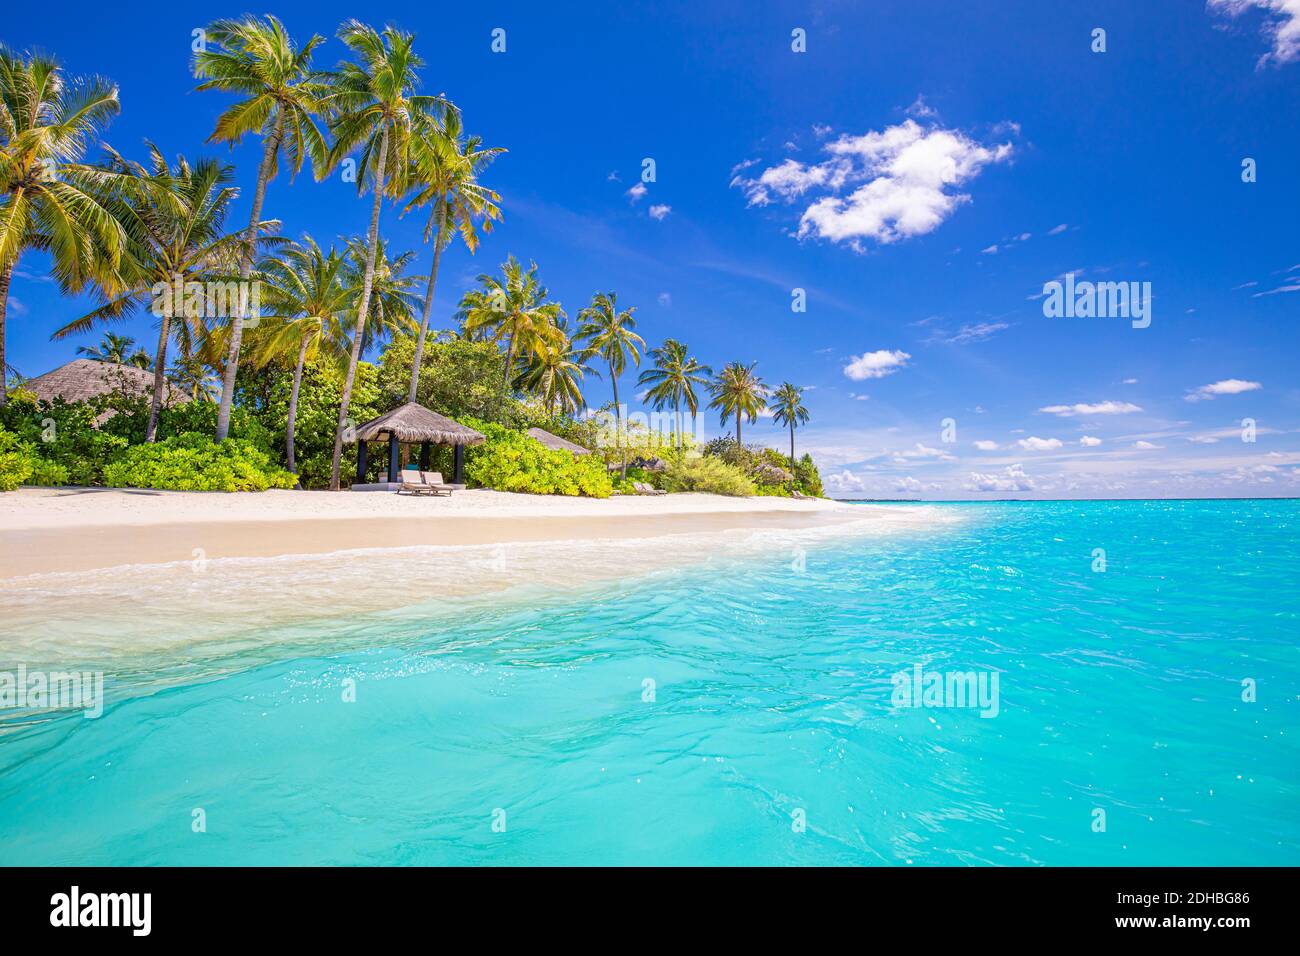 Beautiful tropical beach banner. White sand and coco palms travel tourism panorama. Amazing inspire beach landscape. Luxury island vacation holiday Stock Photo